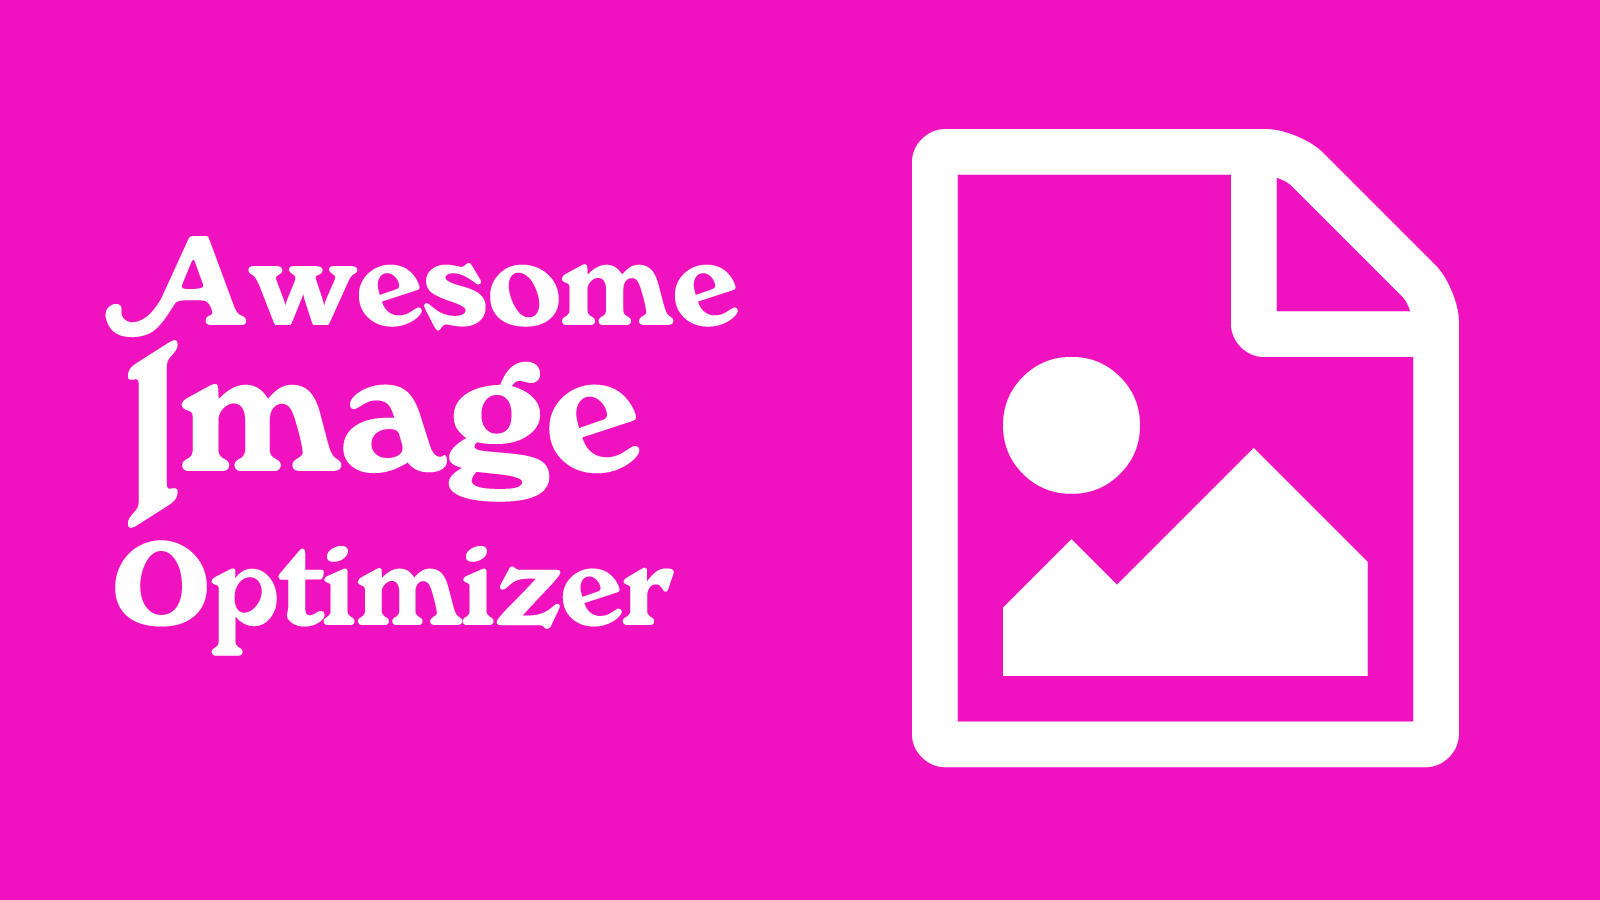 Awesome Image Optimizer for Shopify